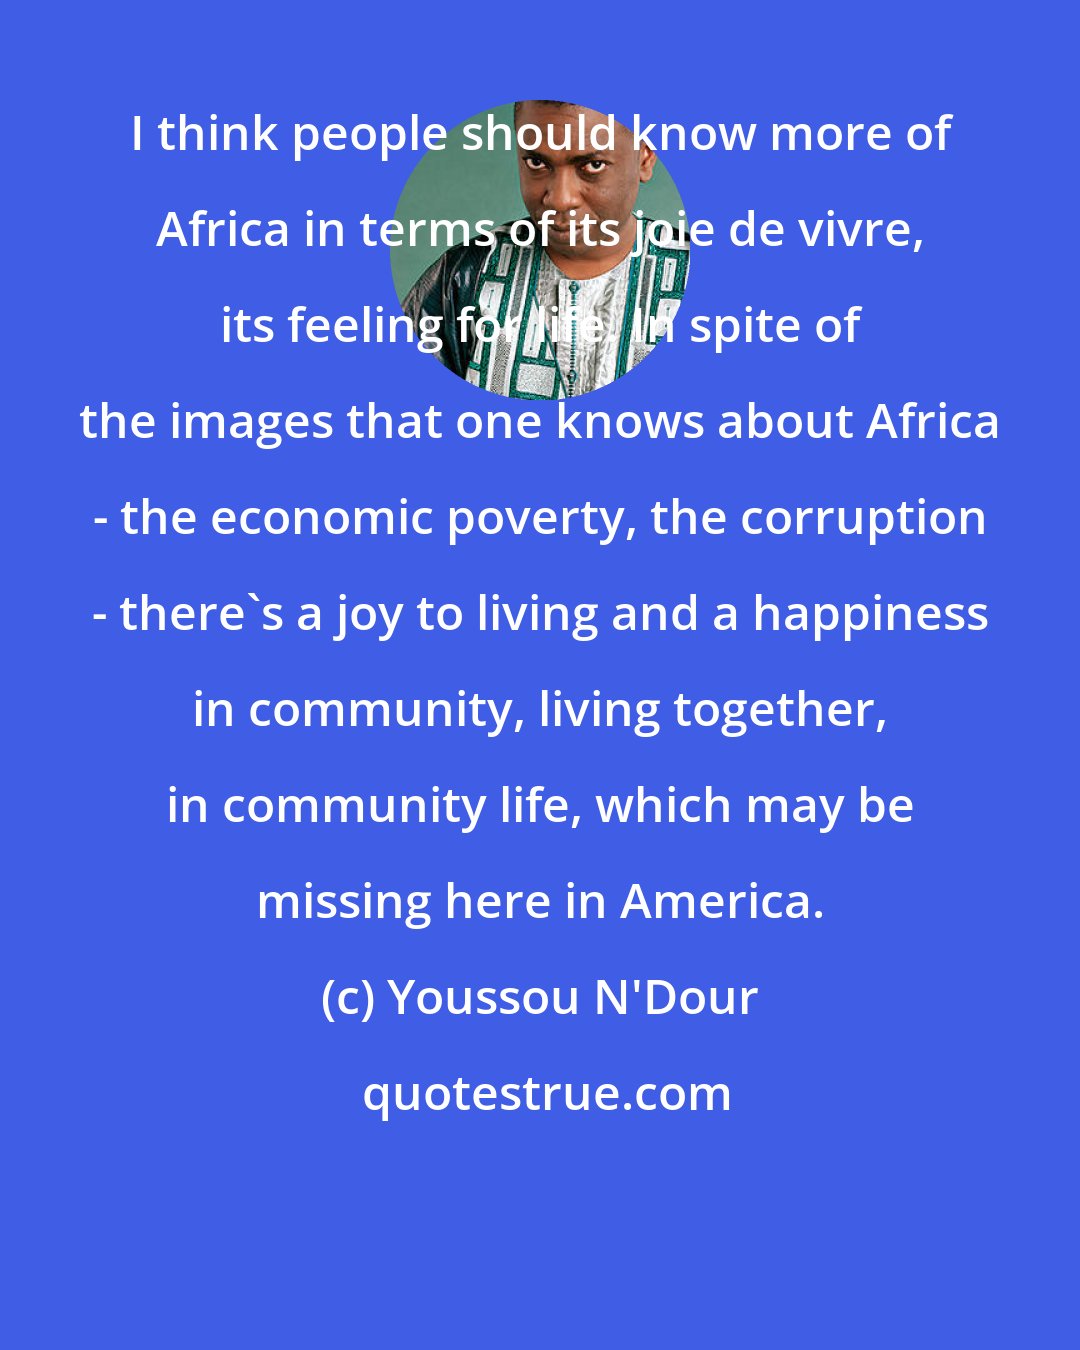 Youssou N'Dour: I think people should know more of Africa in terms of its joie de vivre, its feeling for life. In spite of the images that one knows about Africa - the economic poverty, the corruption - there's a joy to living and a happiness in community, living together, in community life, which may be missing here in America.